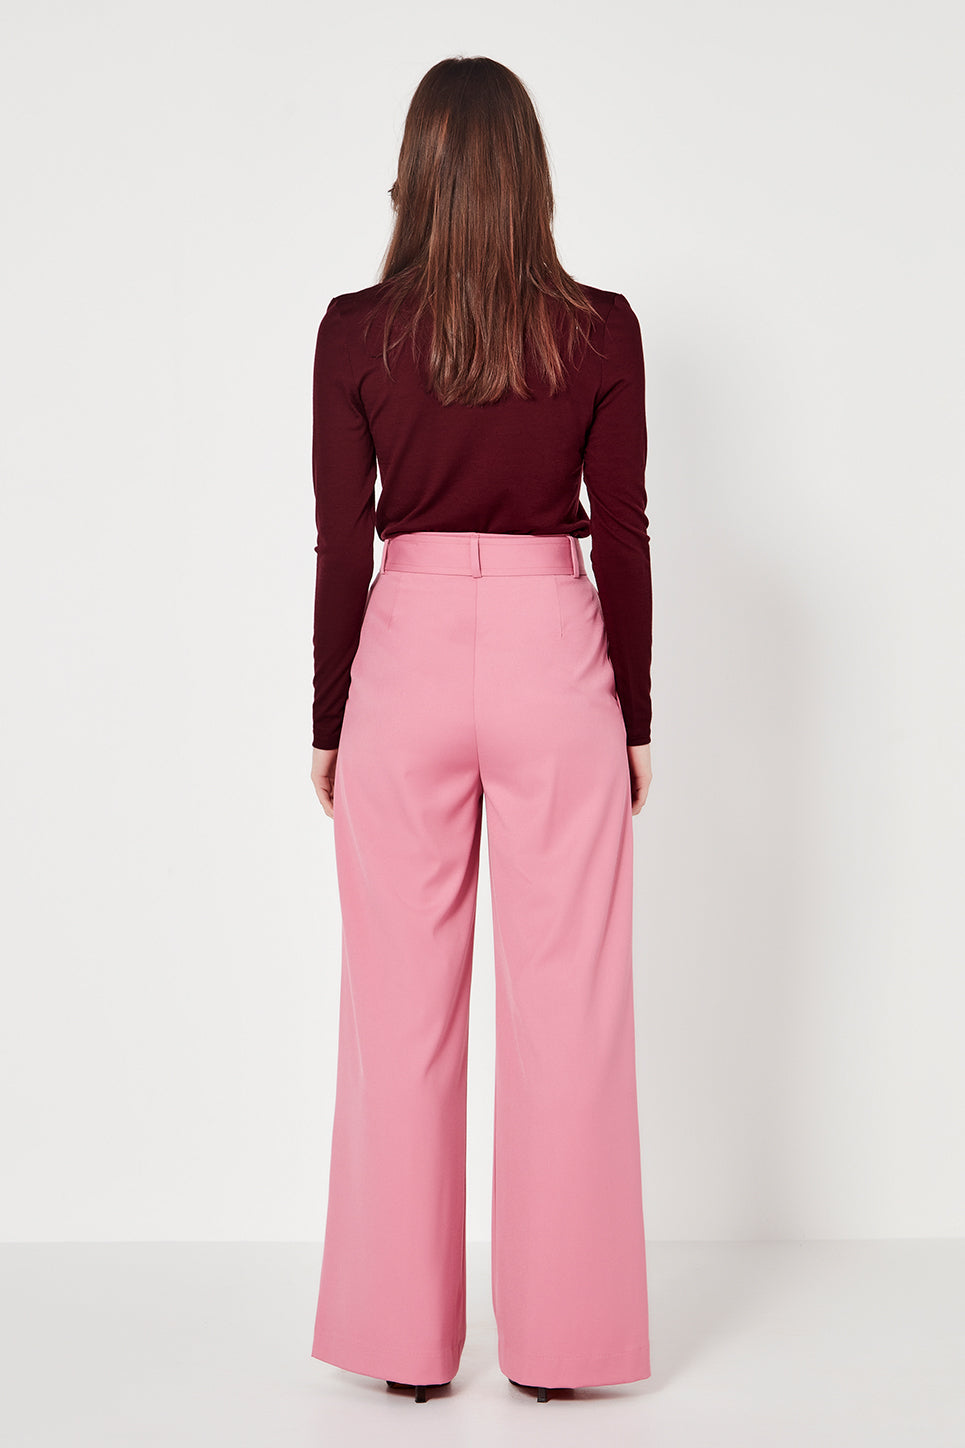 The Asher Trouser in Peony